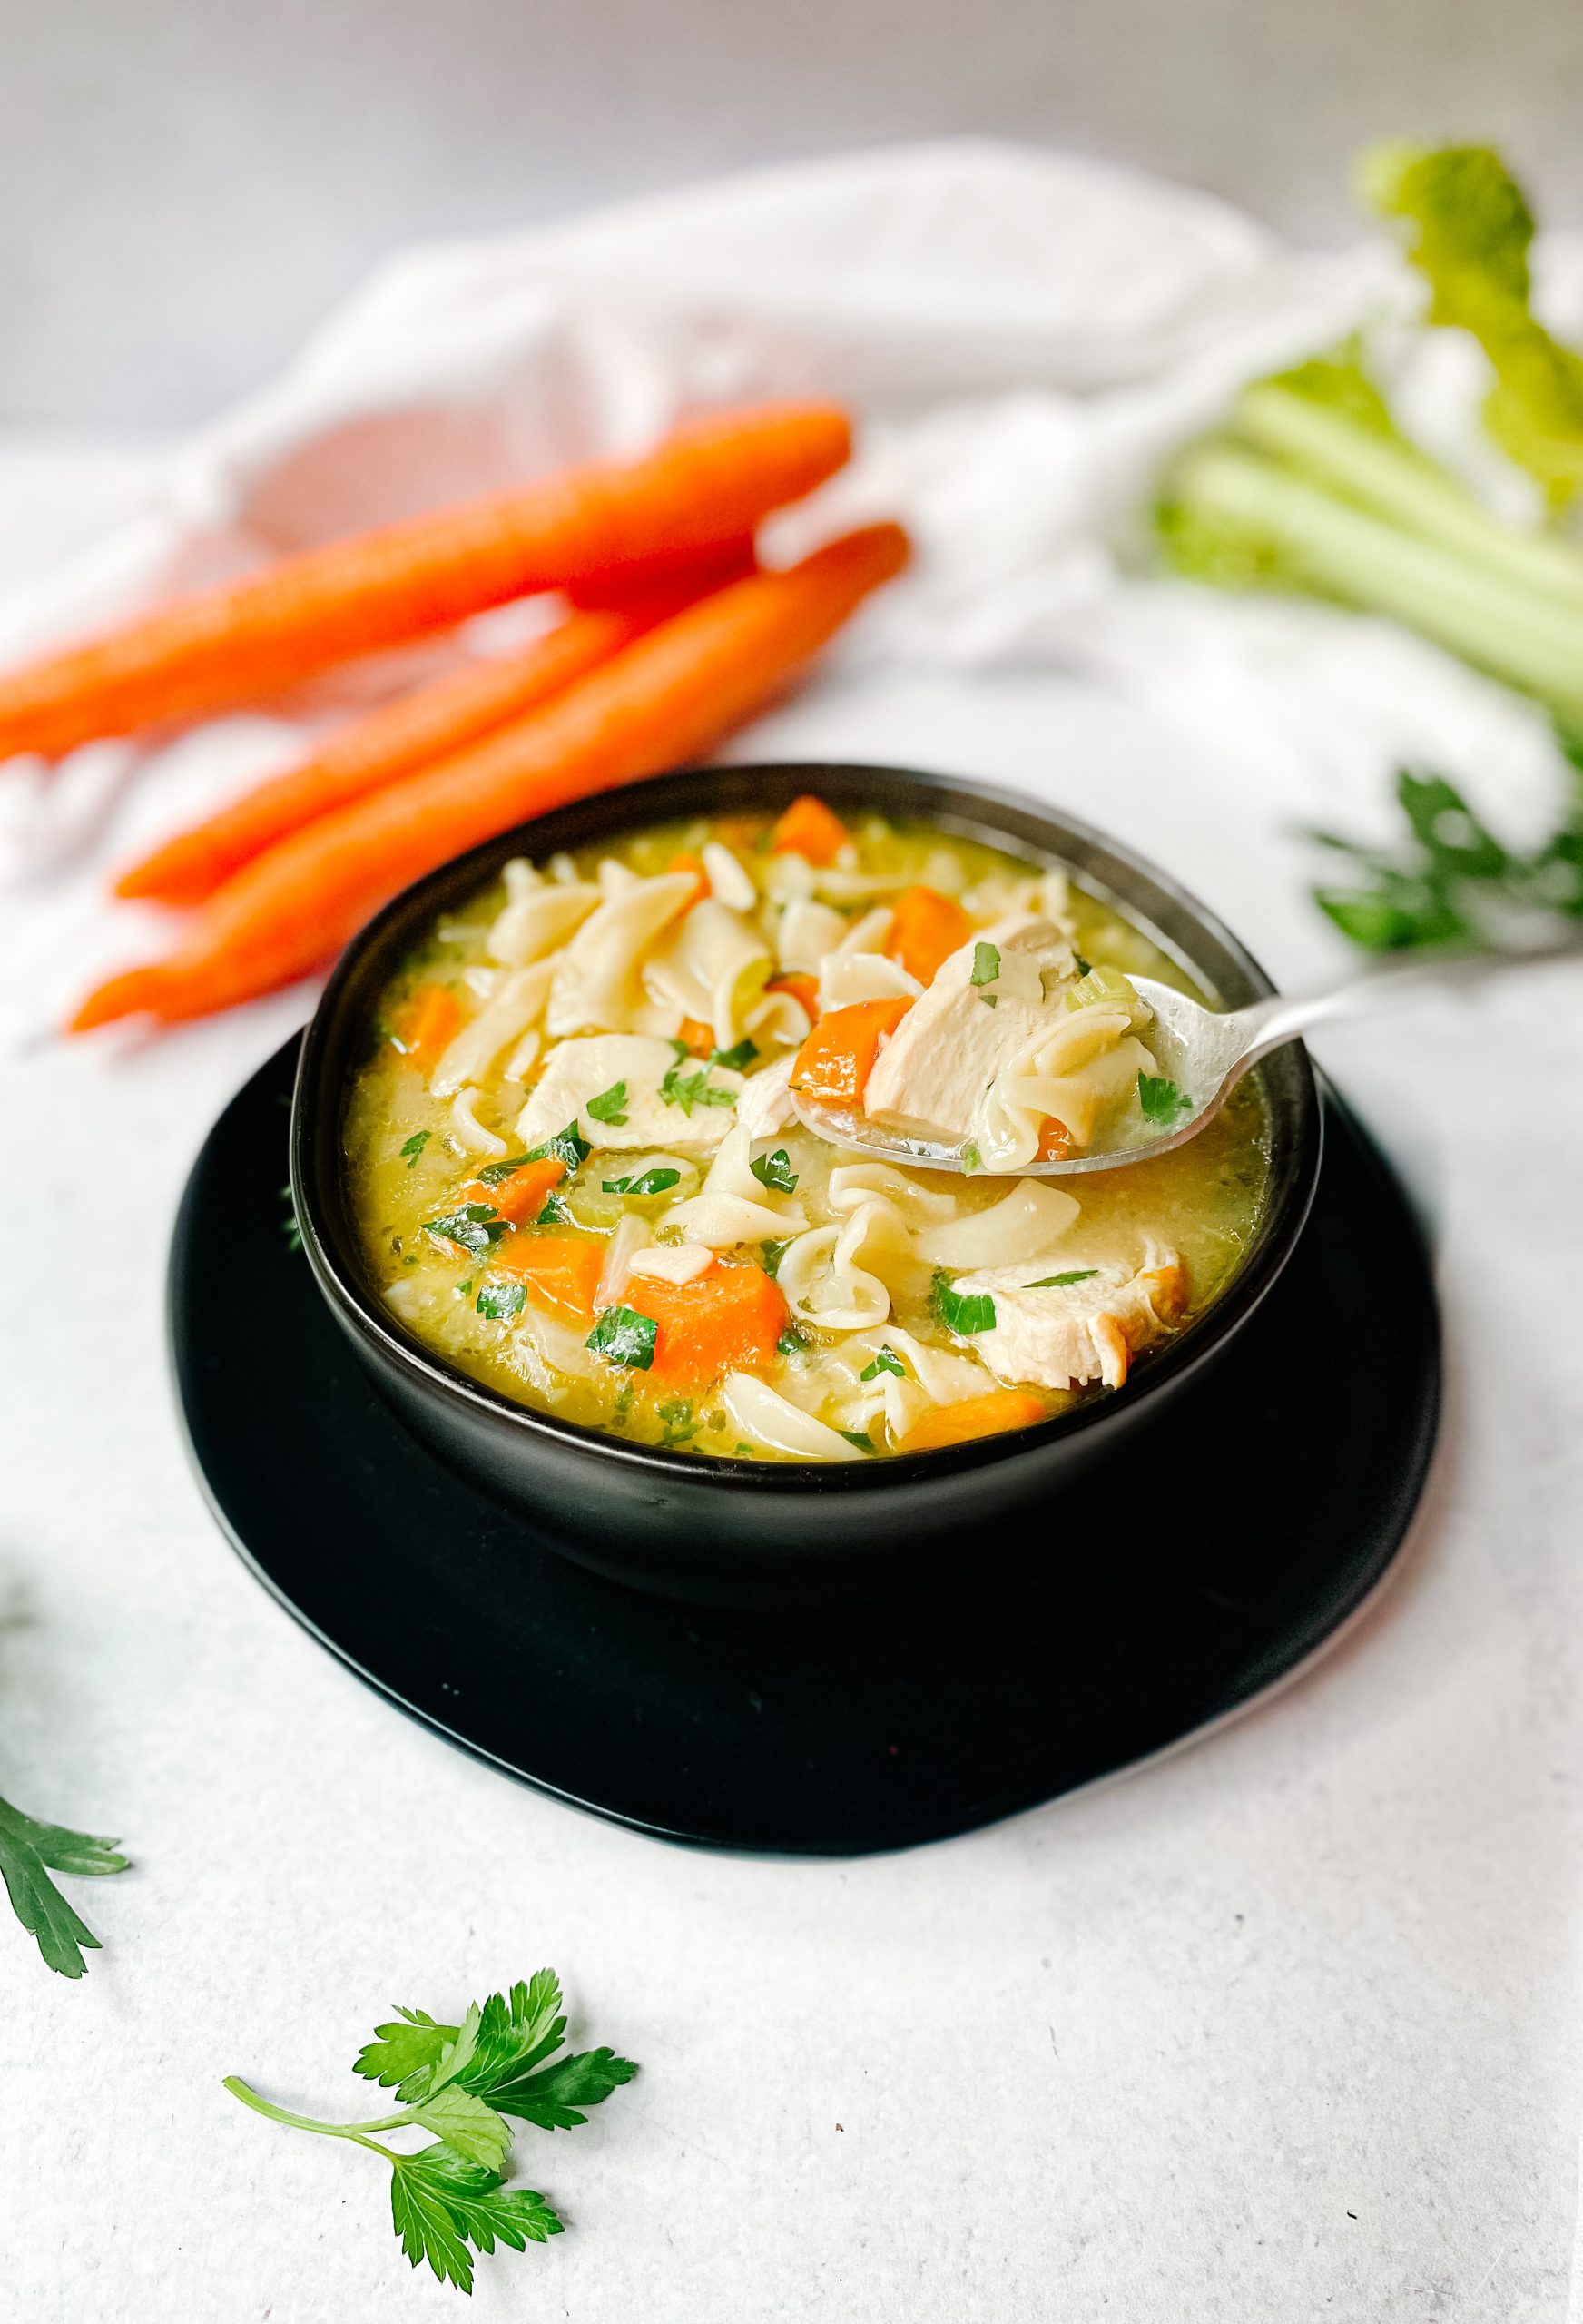 https://plumstreetcollective.com/wp-content/uploads/2022/11/Easy-Chicken-Noodle-Soup-13-scaled.jpg